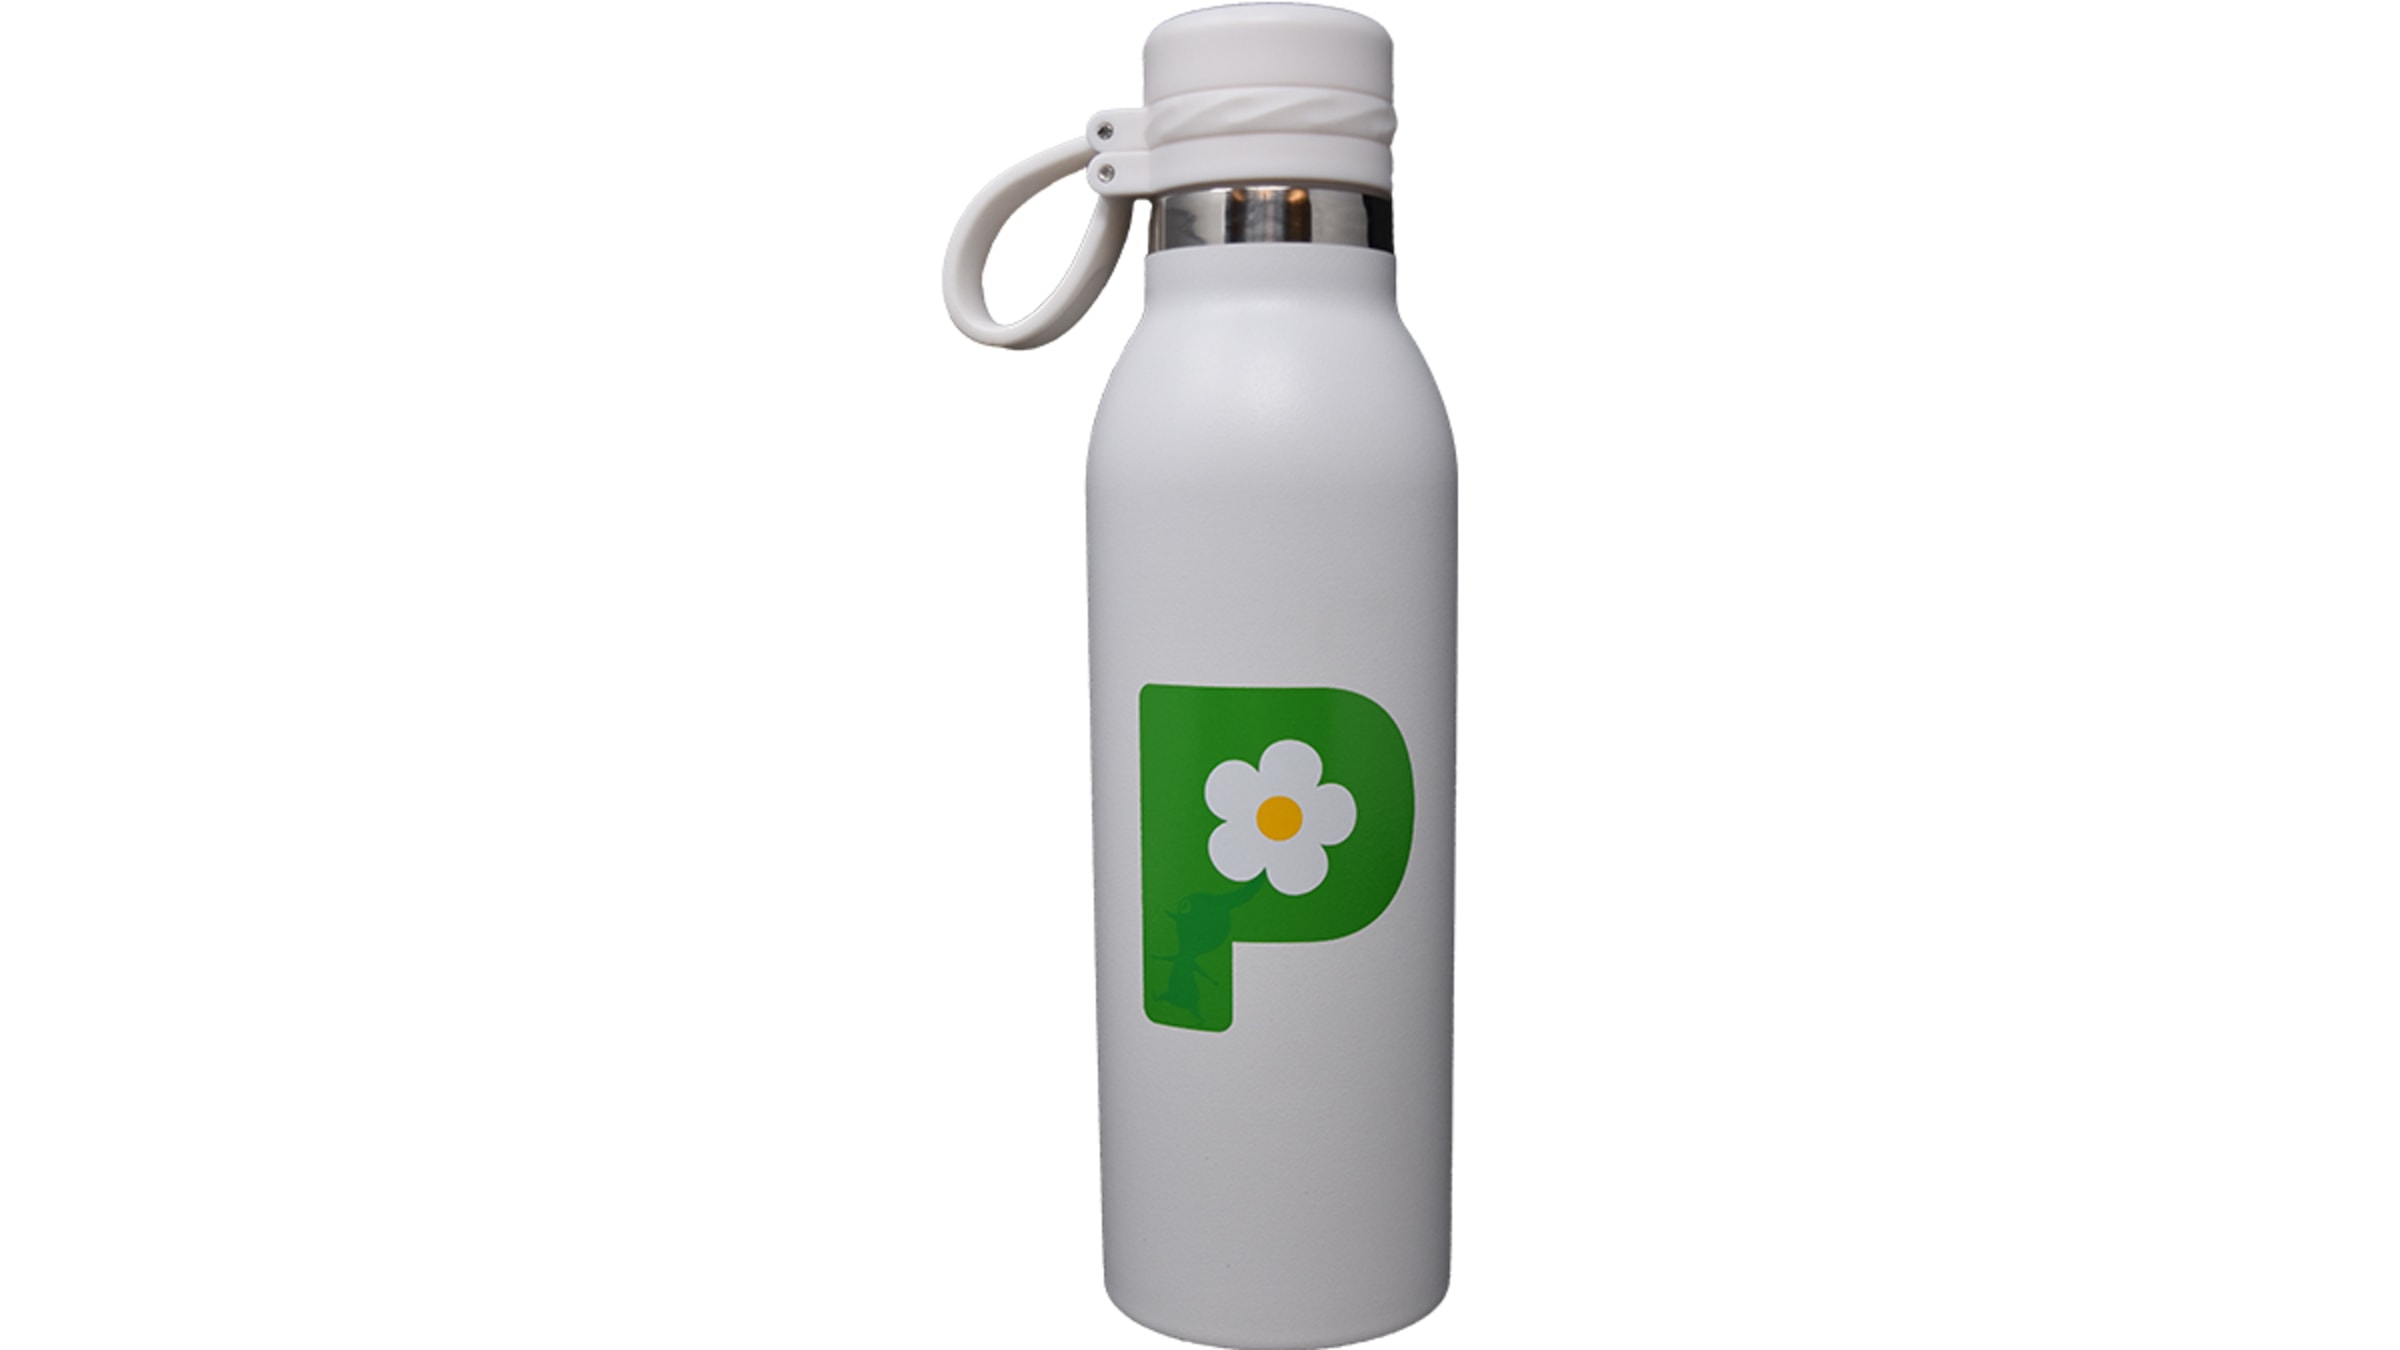 https://assets.nintendo.com/image/upload/c_fill,w_1200/q_auto:best/f_auto/dpr_2.0/ncom/en_US/products/merchandise/collections/pikmin-logo-collection/pikmin-logo-collection-water-bottle-118472/118472-pikmin-logo-collection-water-bottle-logo-1200x675